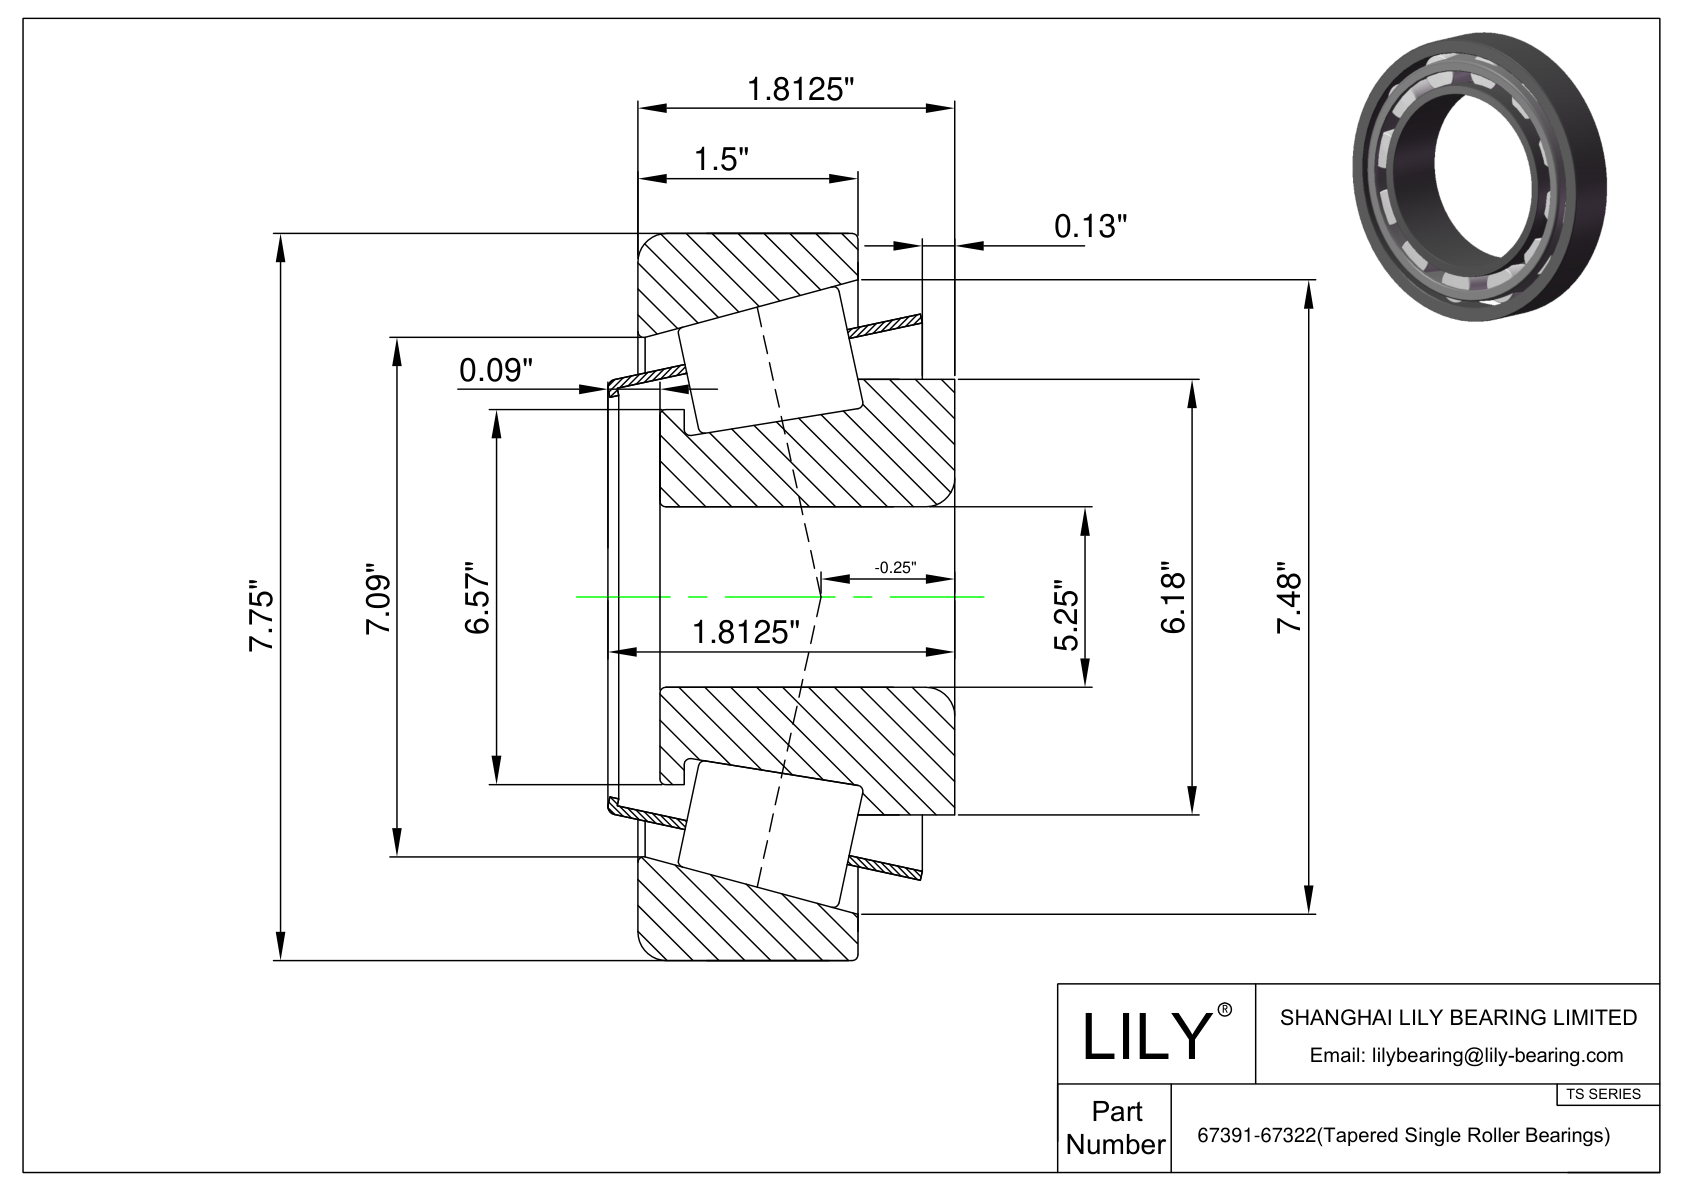 67391-67322 TS (Tapered Single Roller Bearings) (Imperial) cad drawing